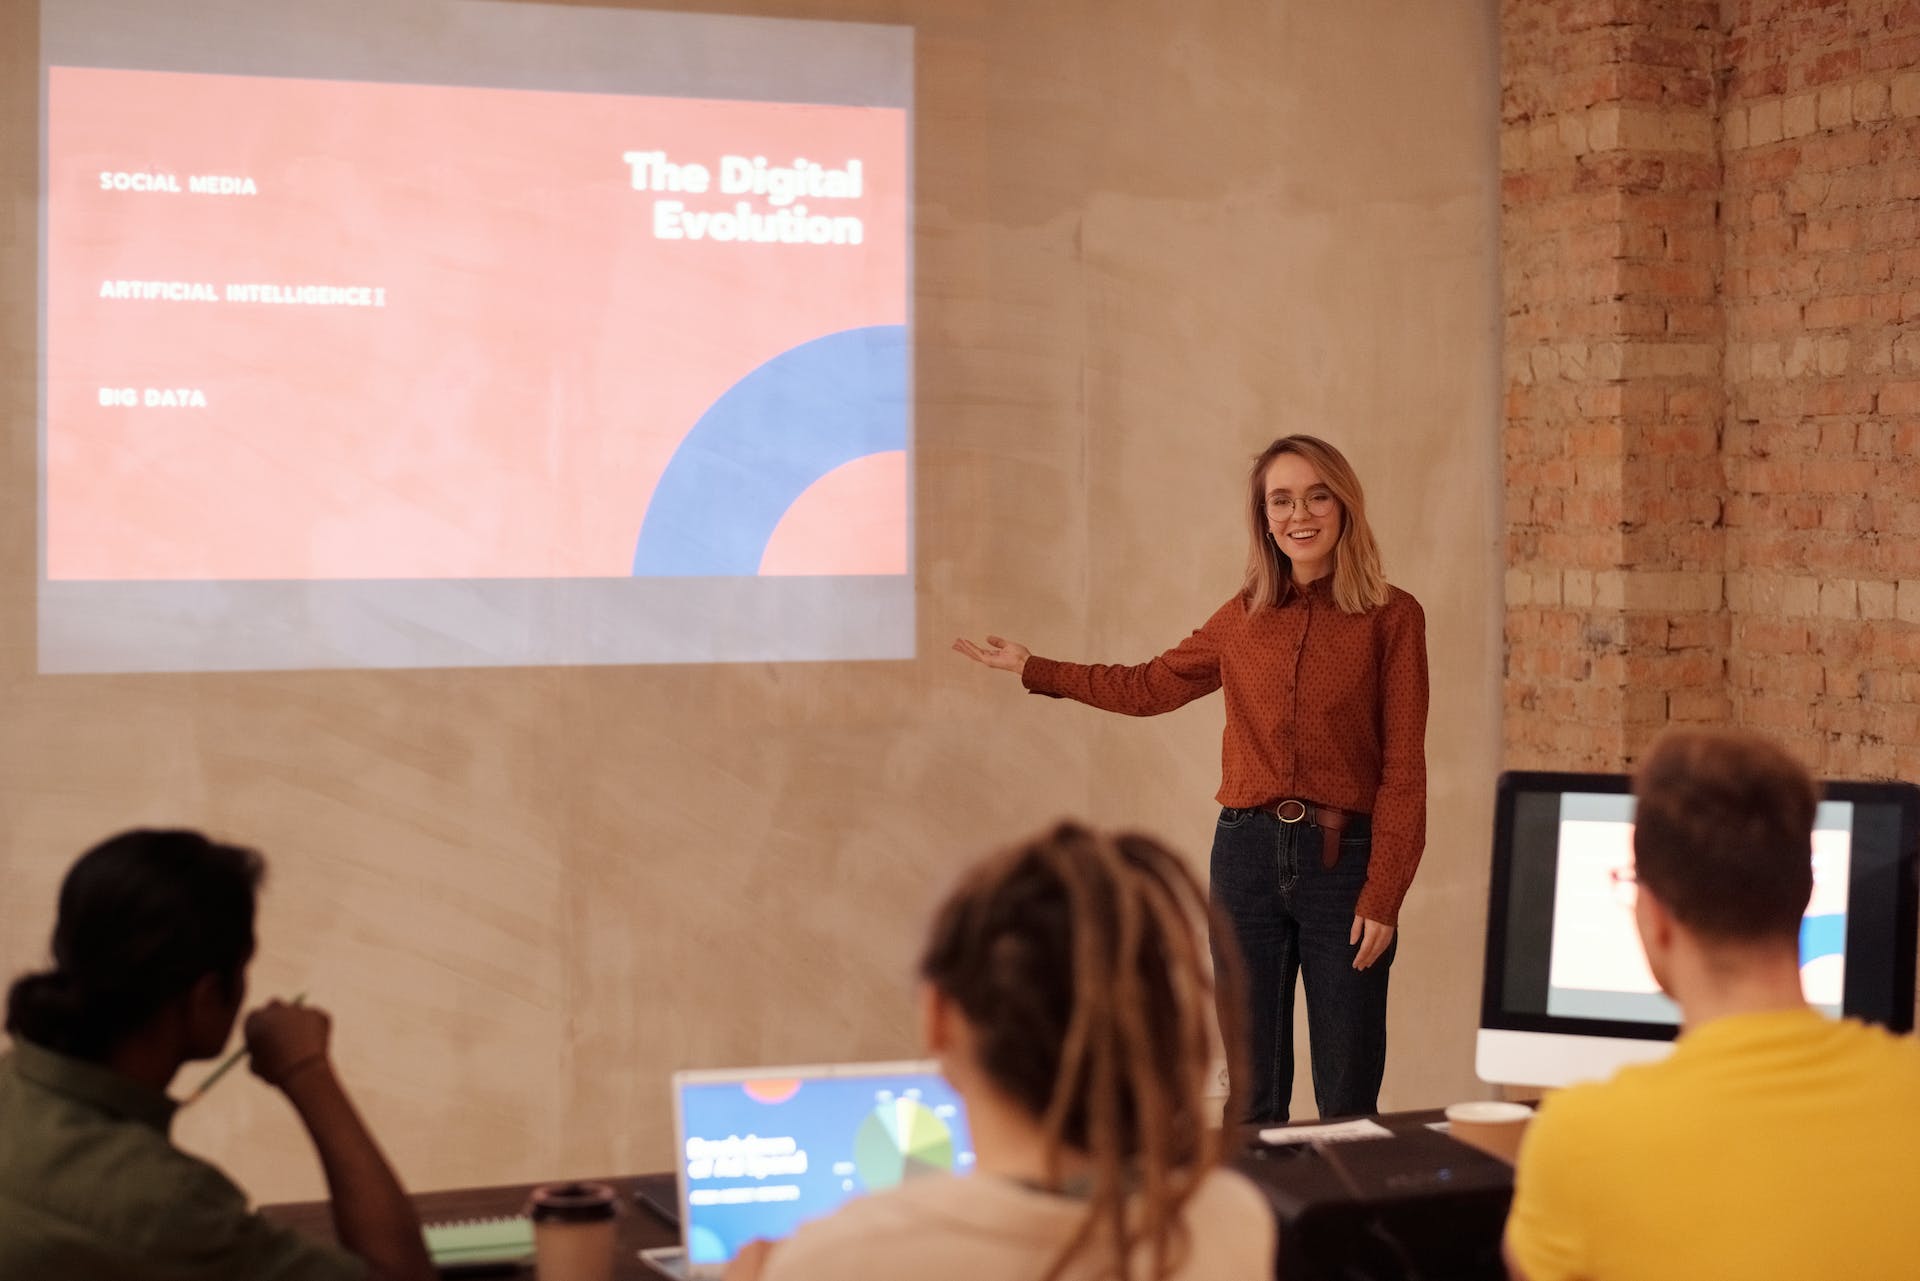 A woman presenting in front of a group of people | Source: Pexels